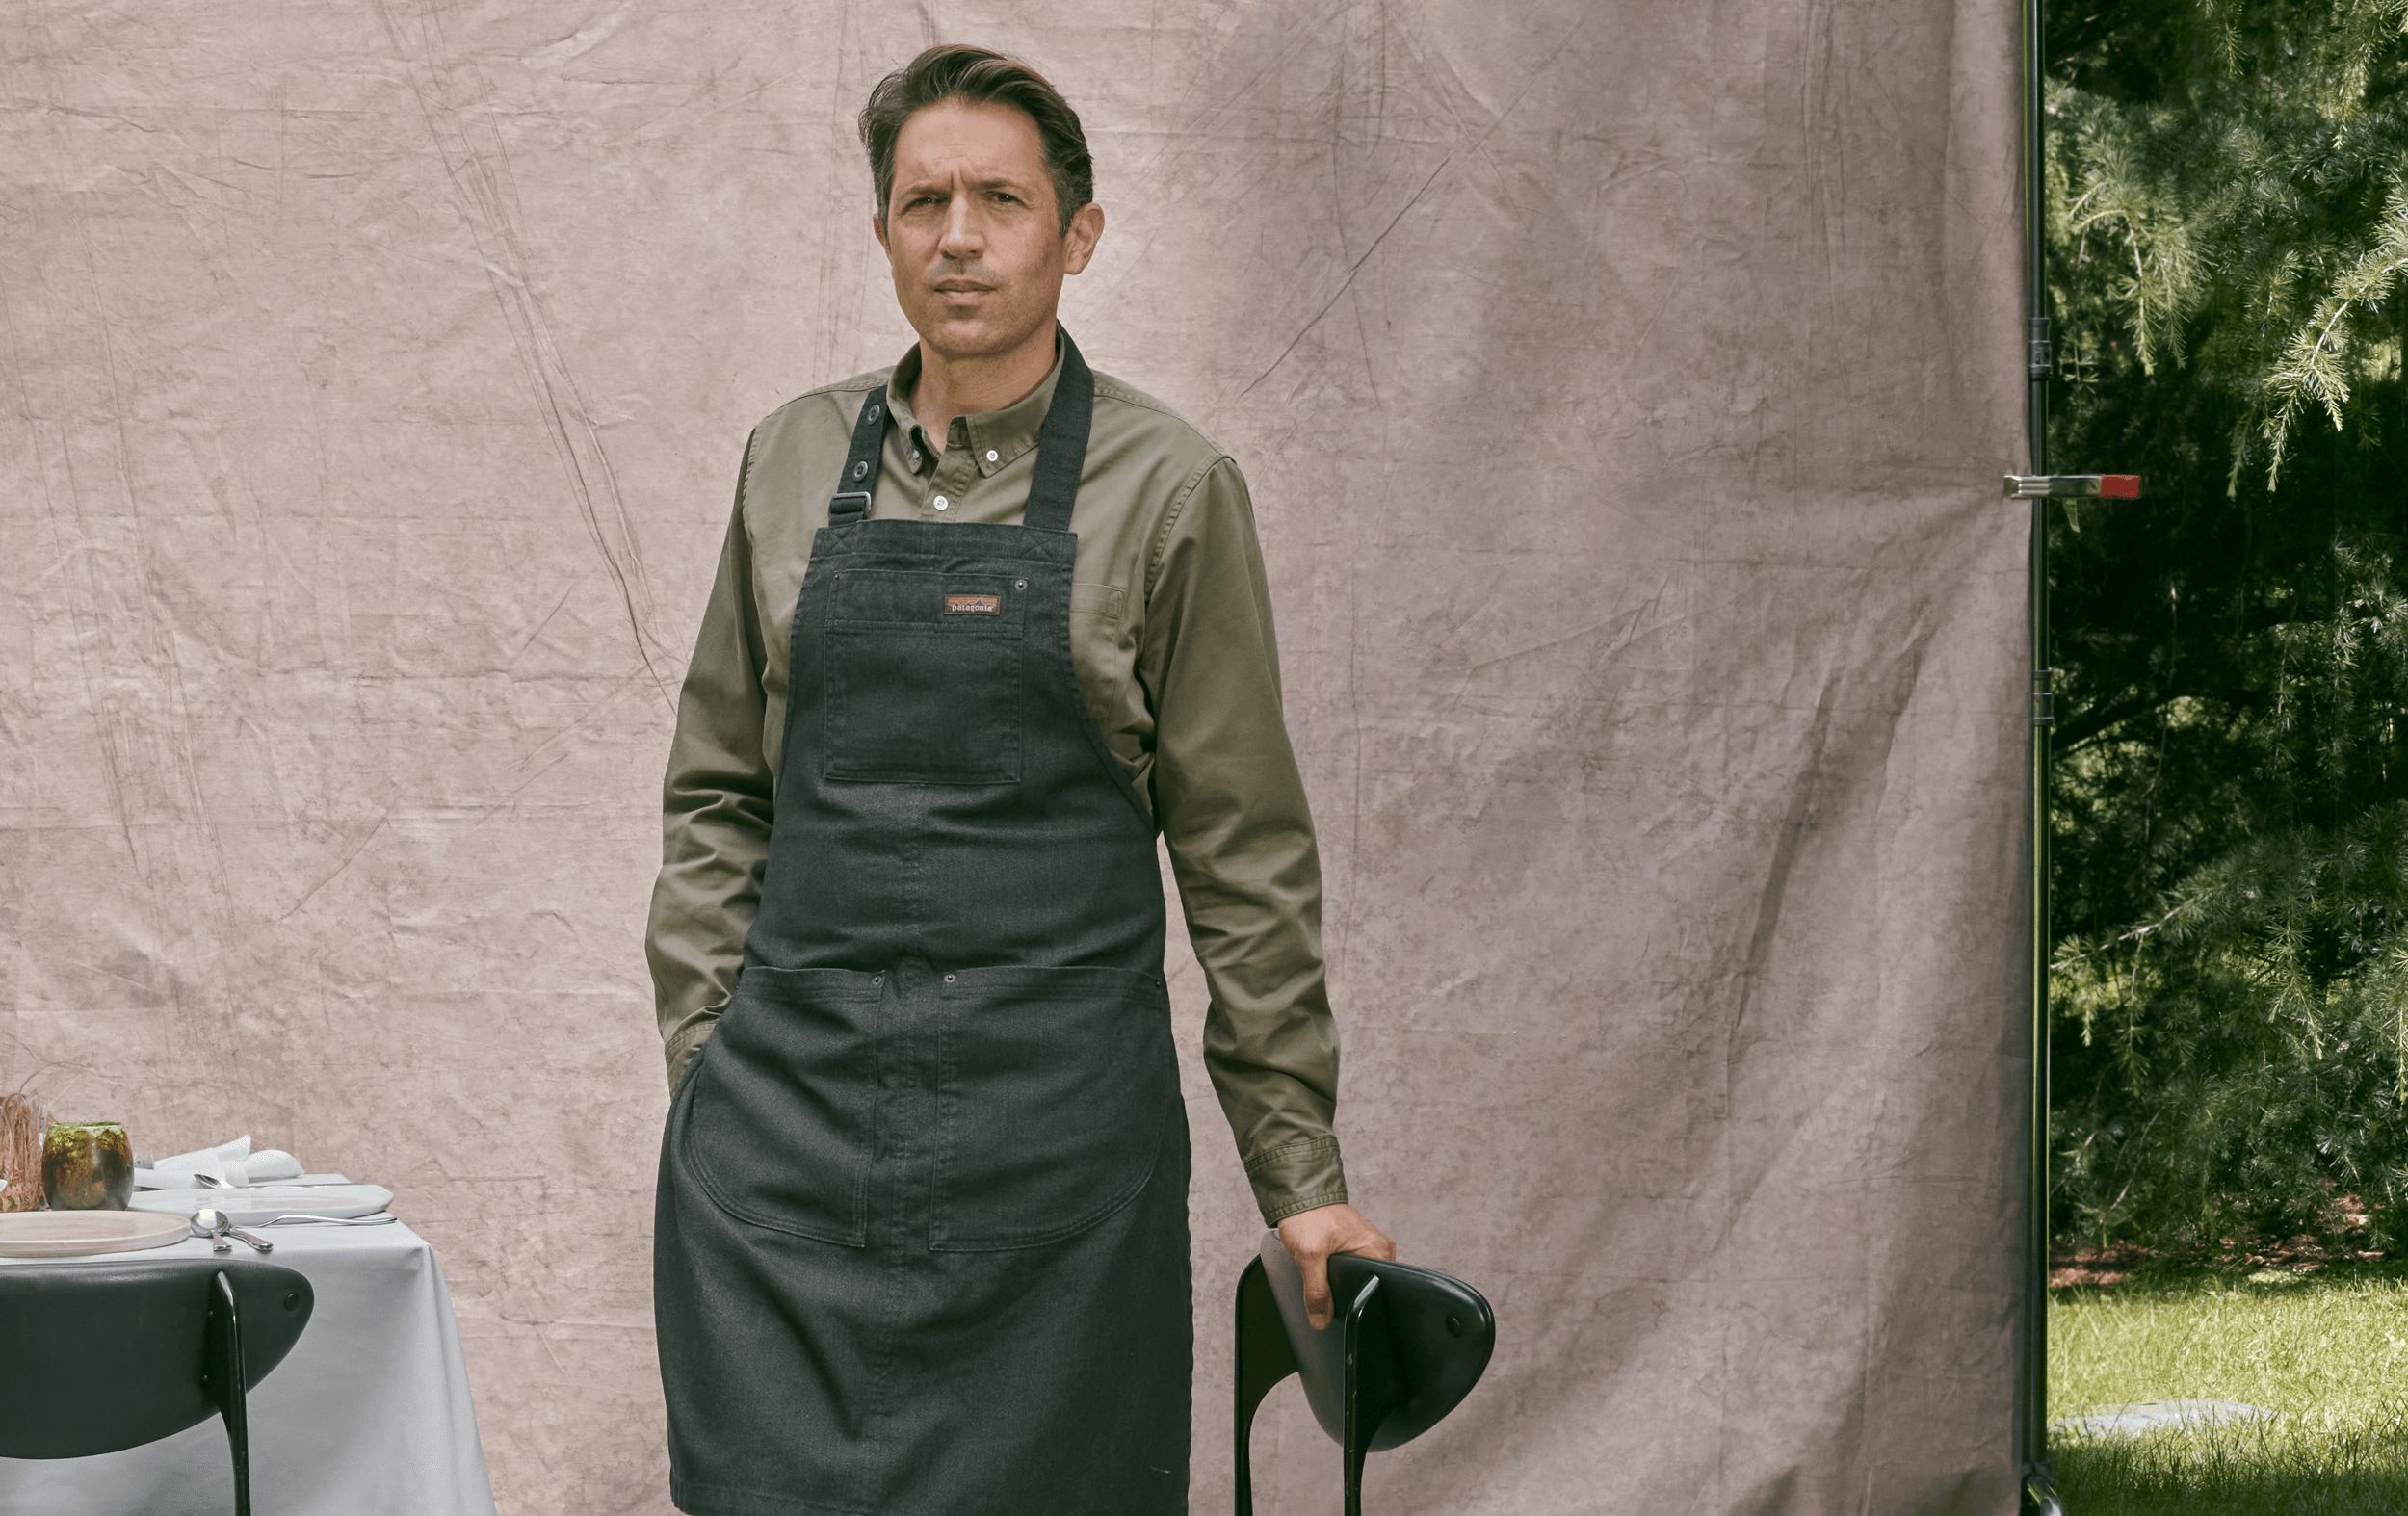 A portrait of Chef Ben Shewry, from one of Melbourne's best restaurants, Attica.